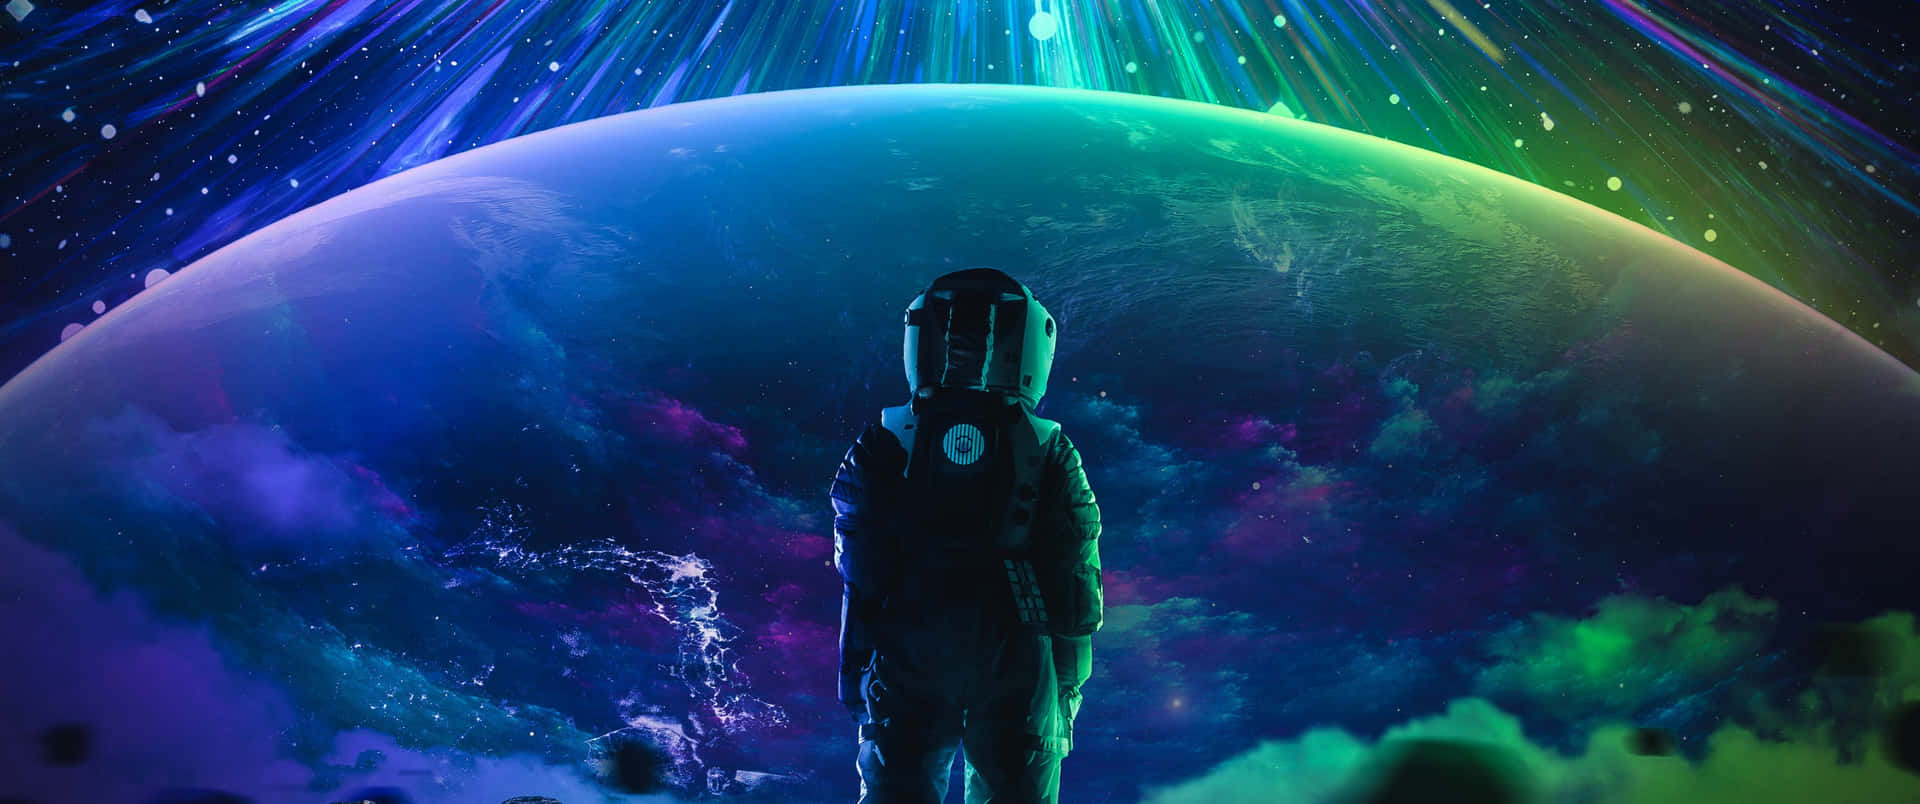 Explore the depths of space in breathtaking Ultra Wide 3440x1440 resolution. Wallpaper